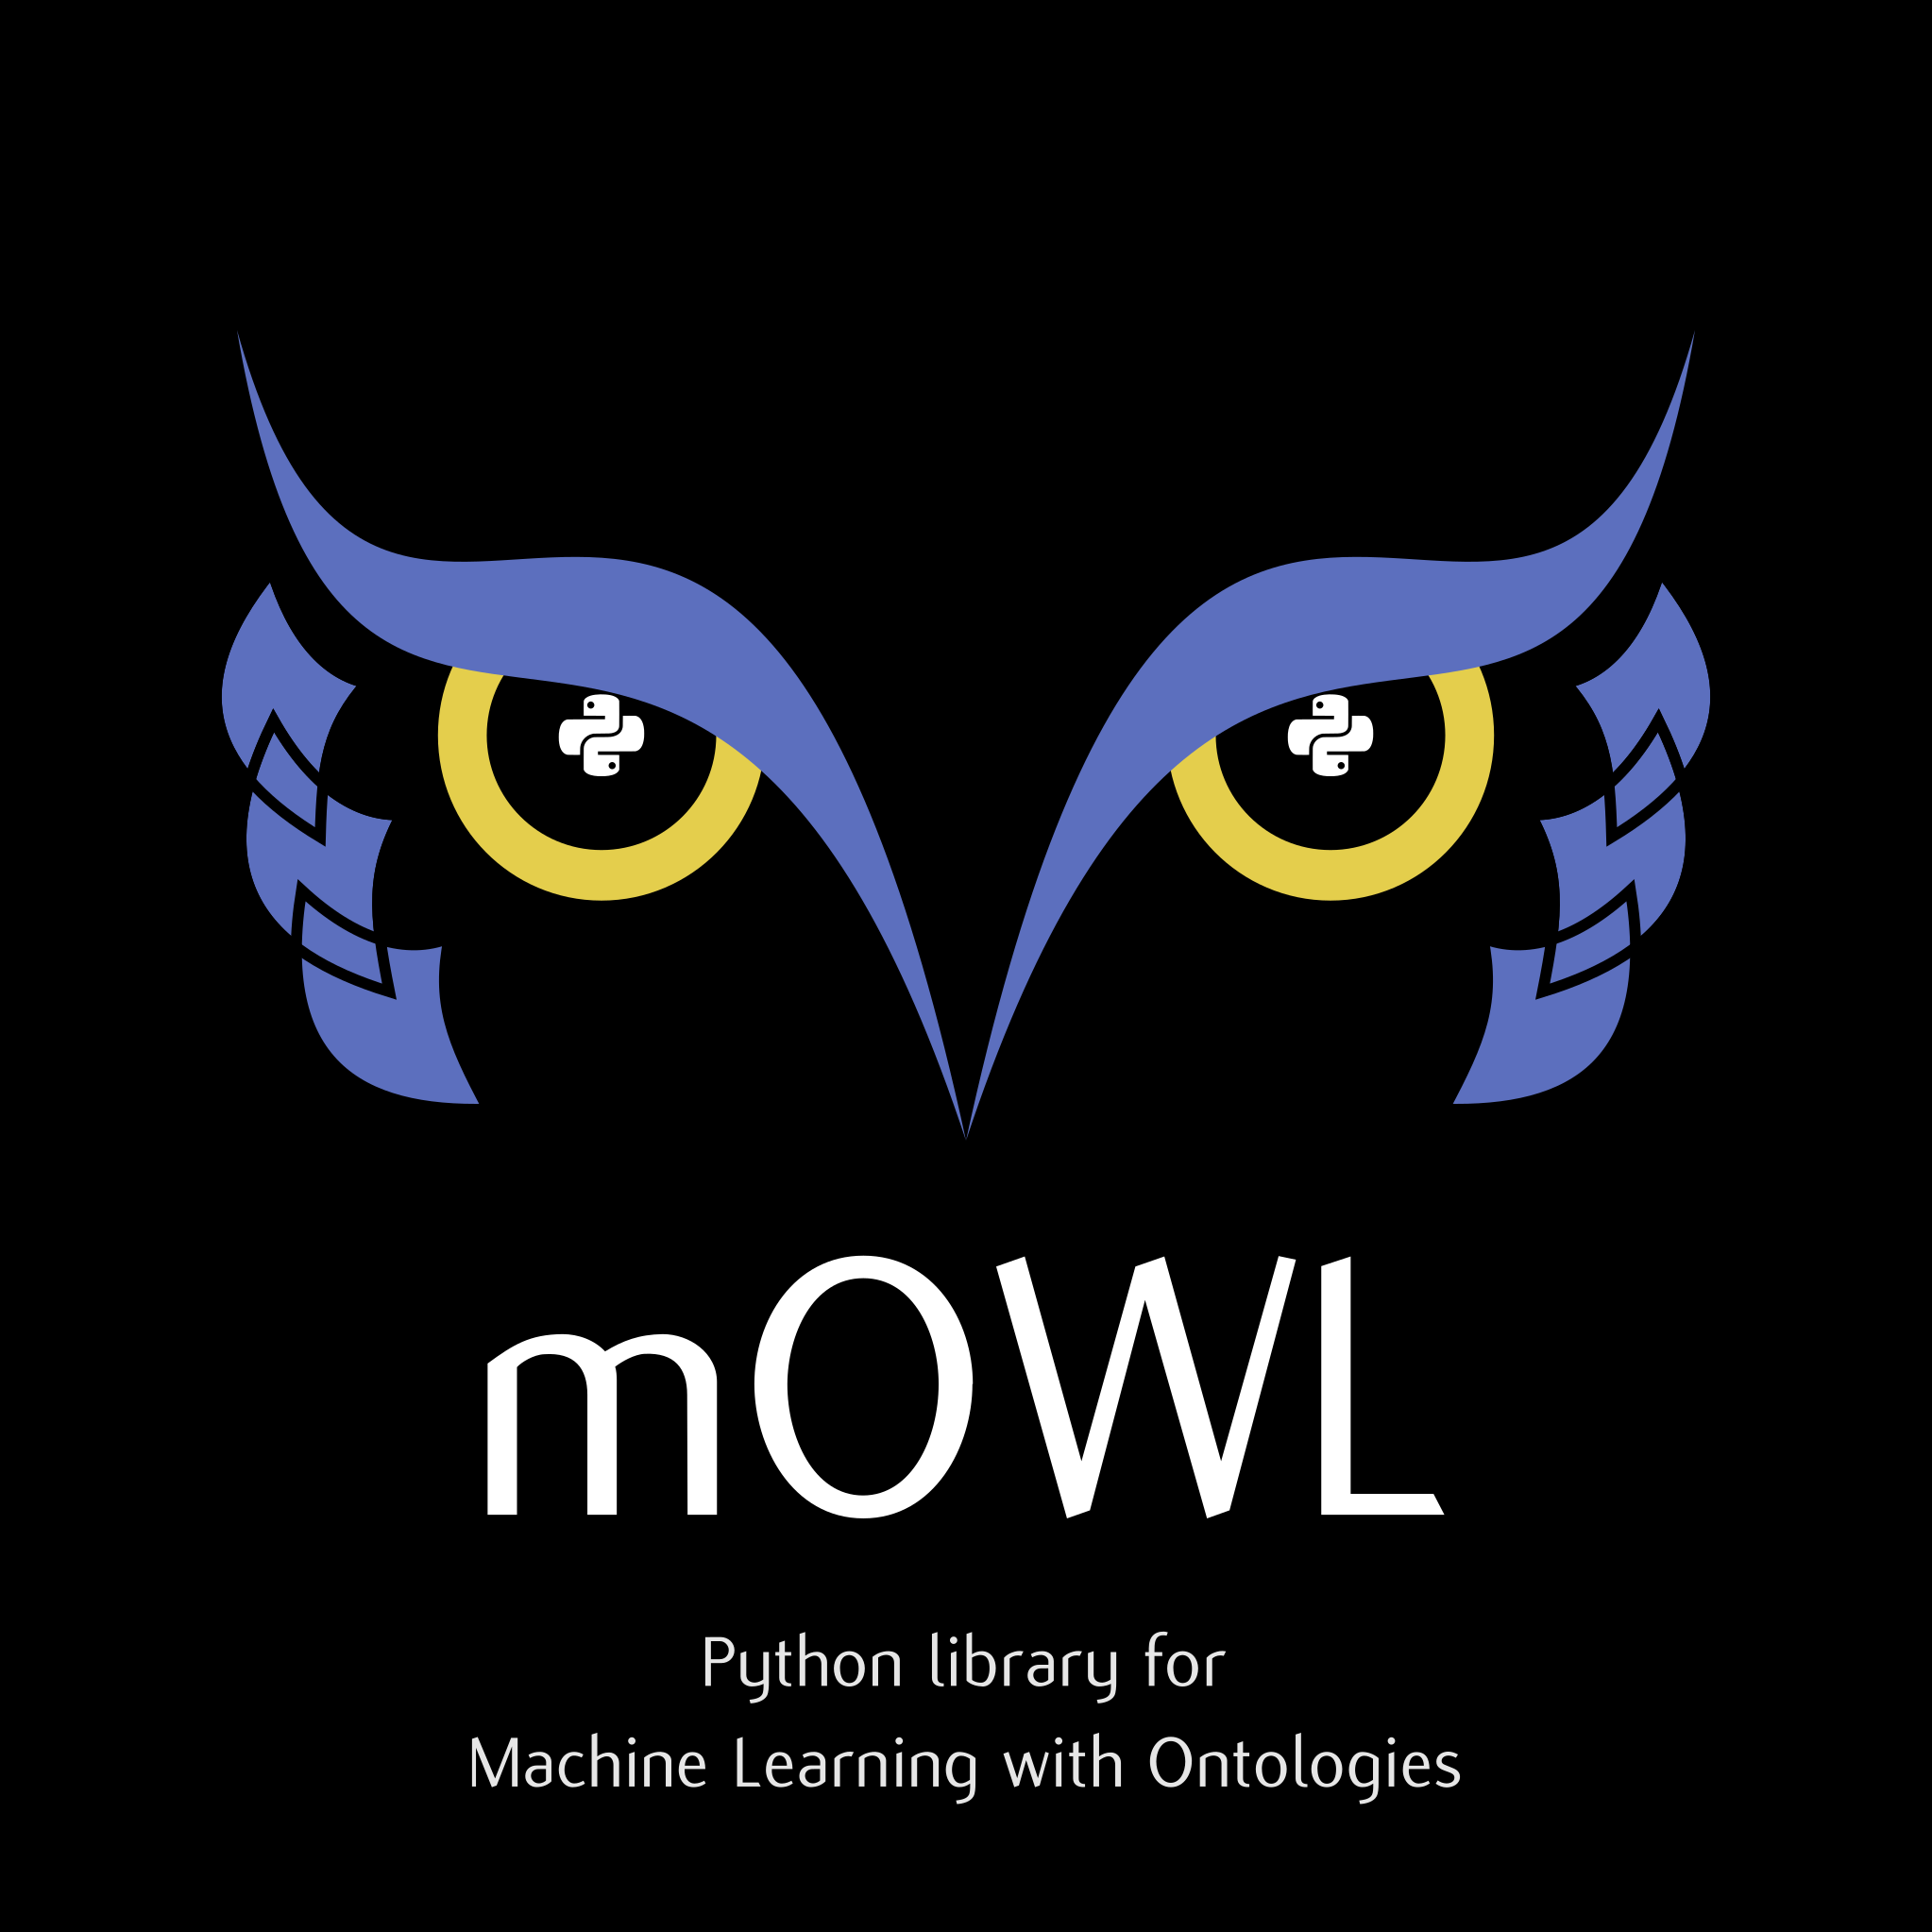 mOWL library